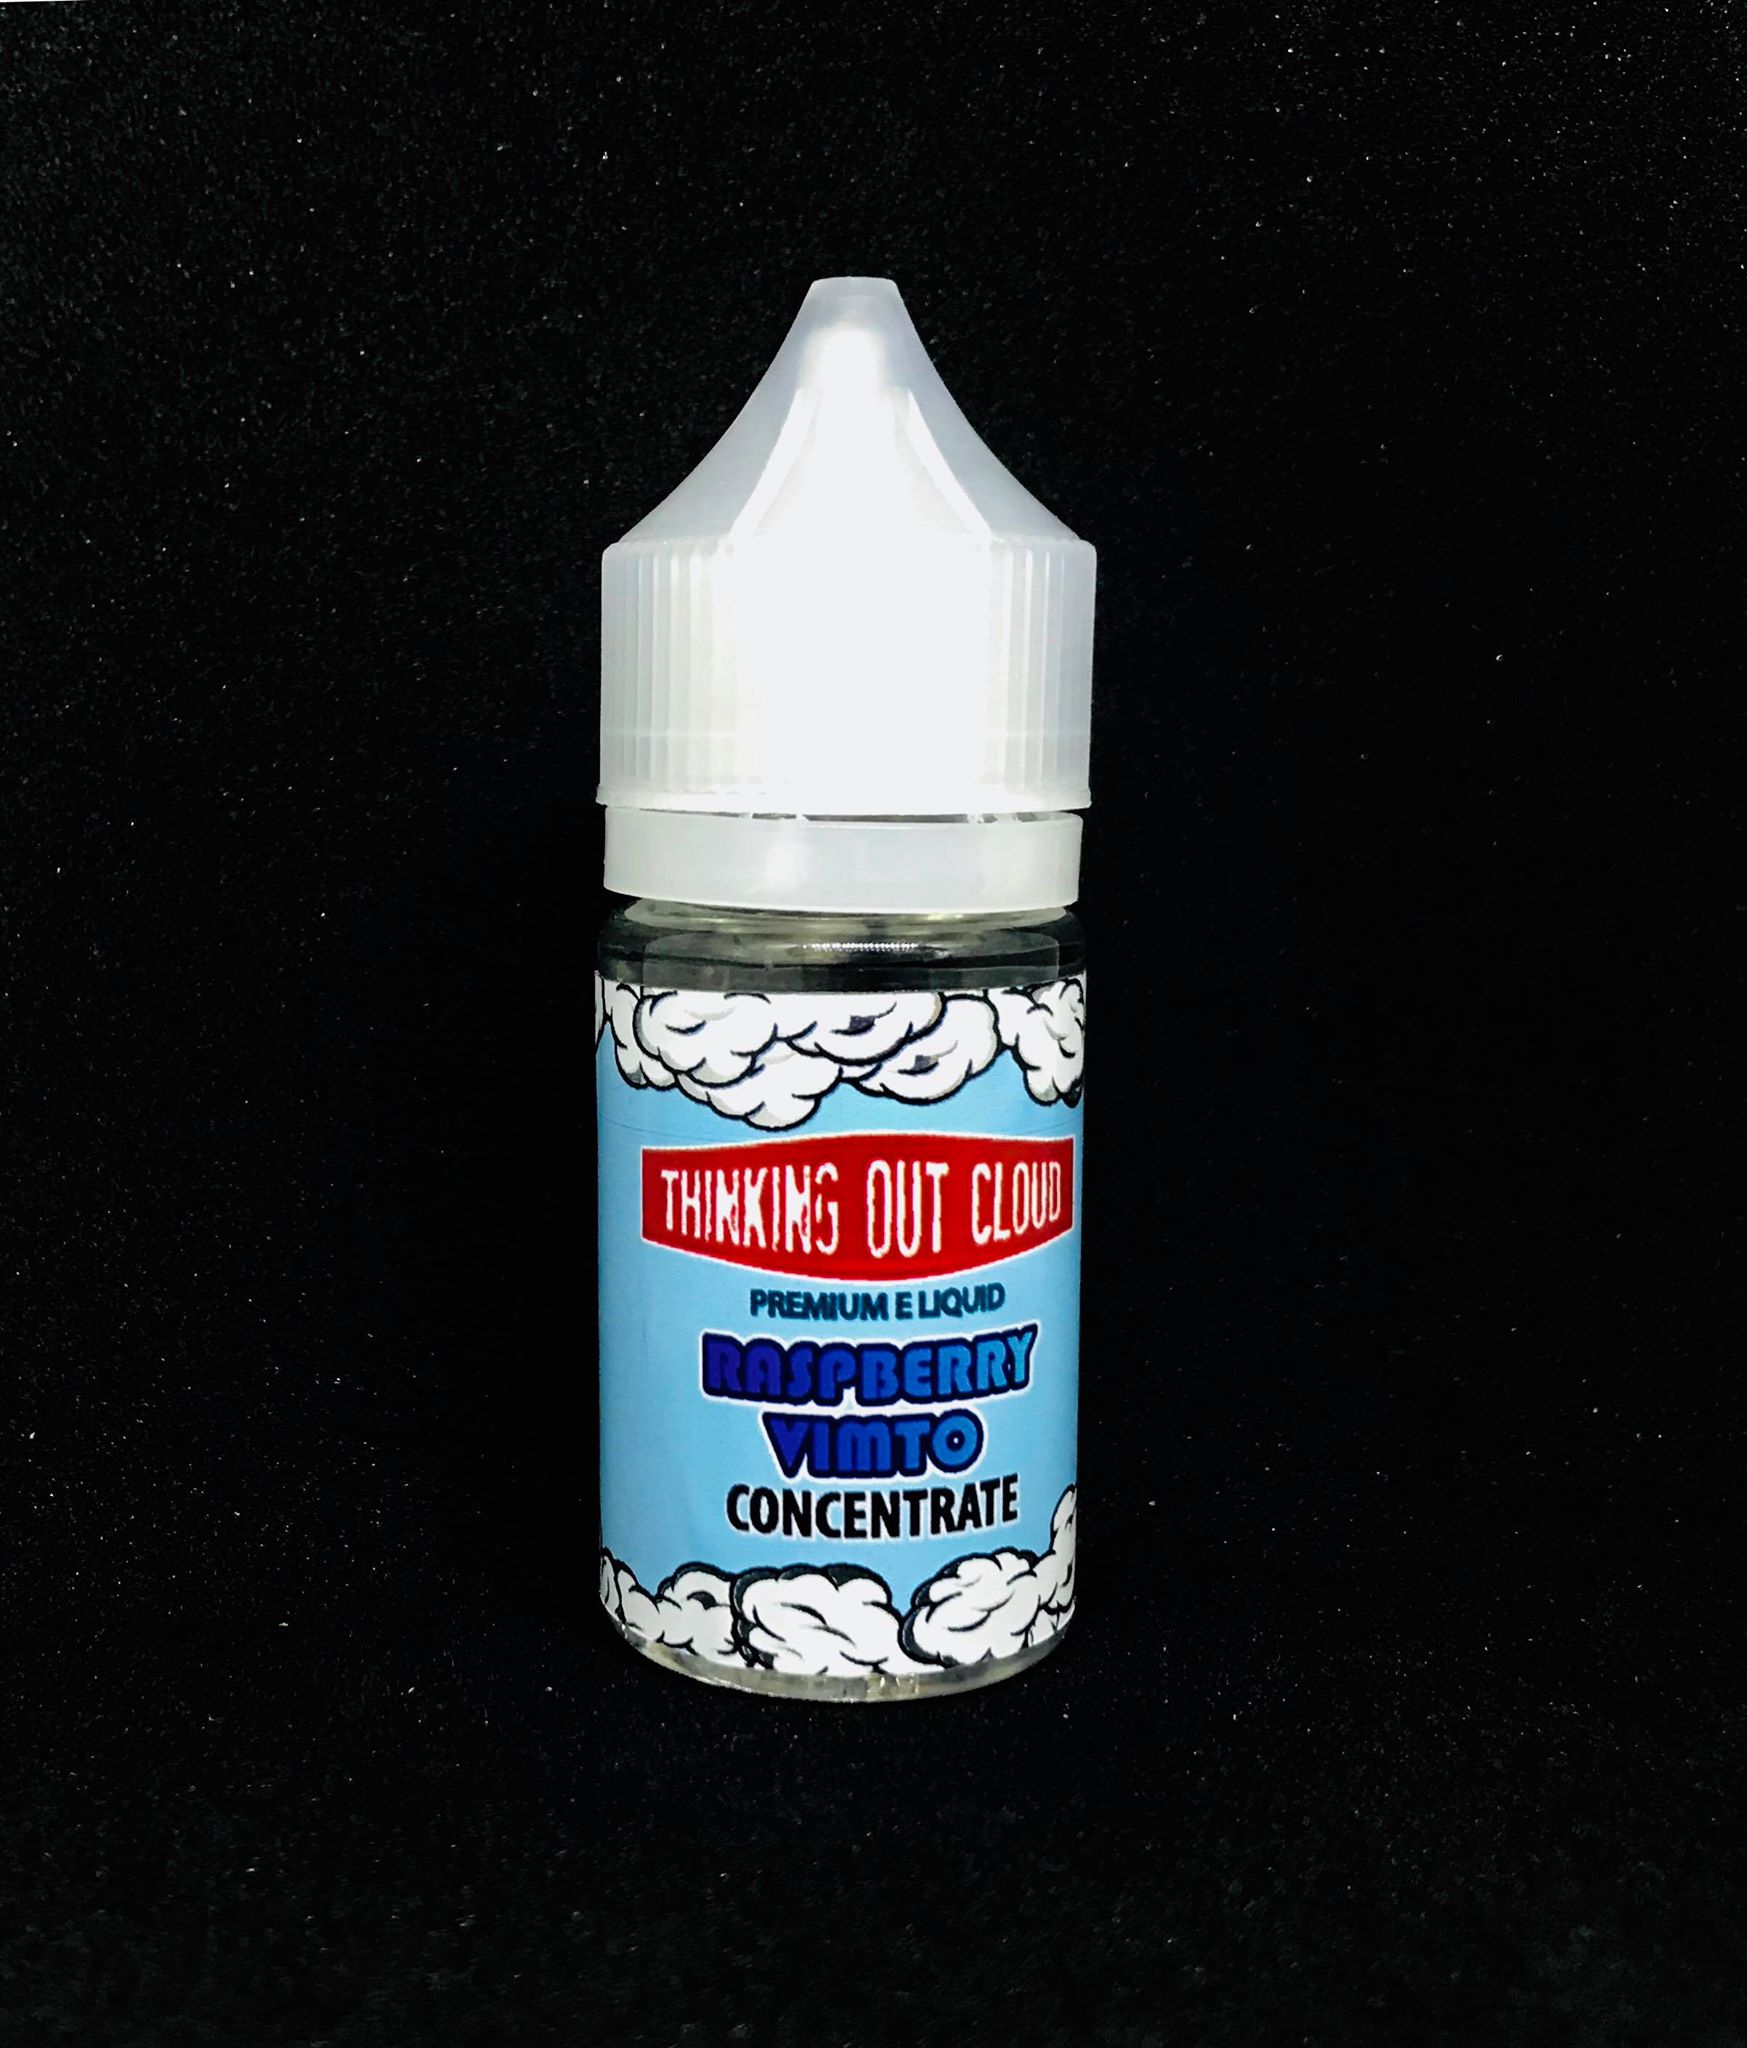 Raspberry Vimto Flavour Concentrate by Thinking Out Cloud